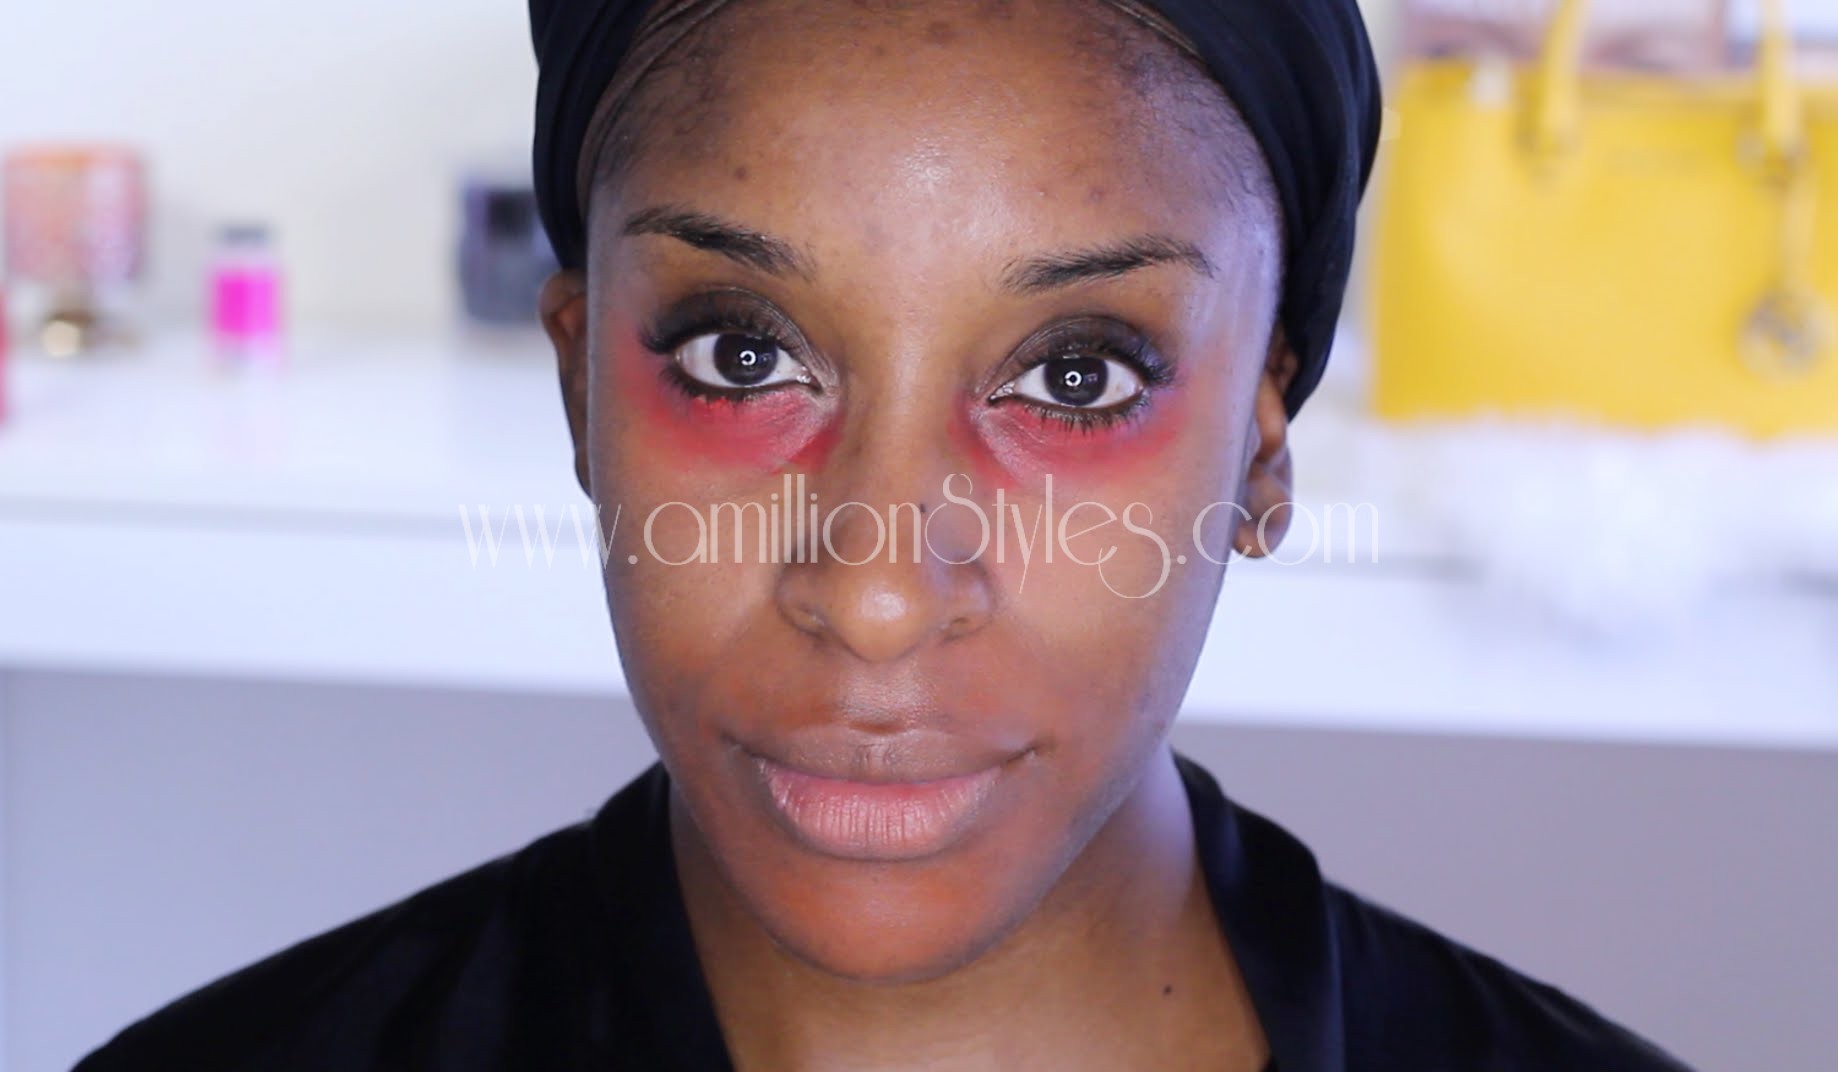 Makeup Video: Learn How To Color Correct Under-Eye Dark Circles